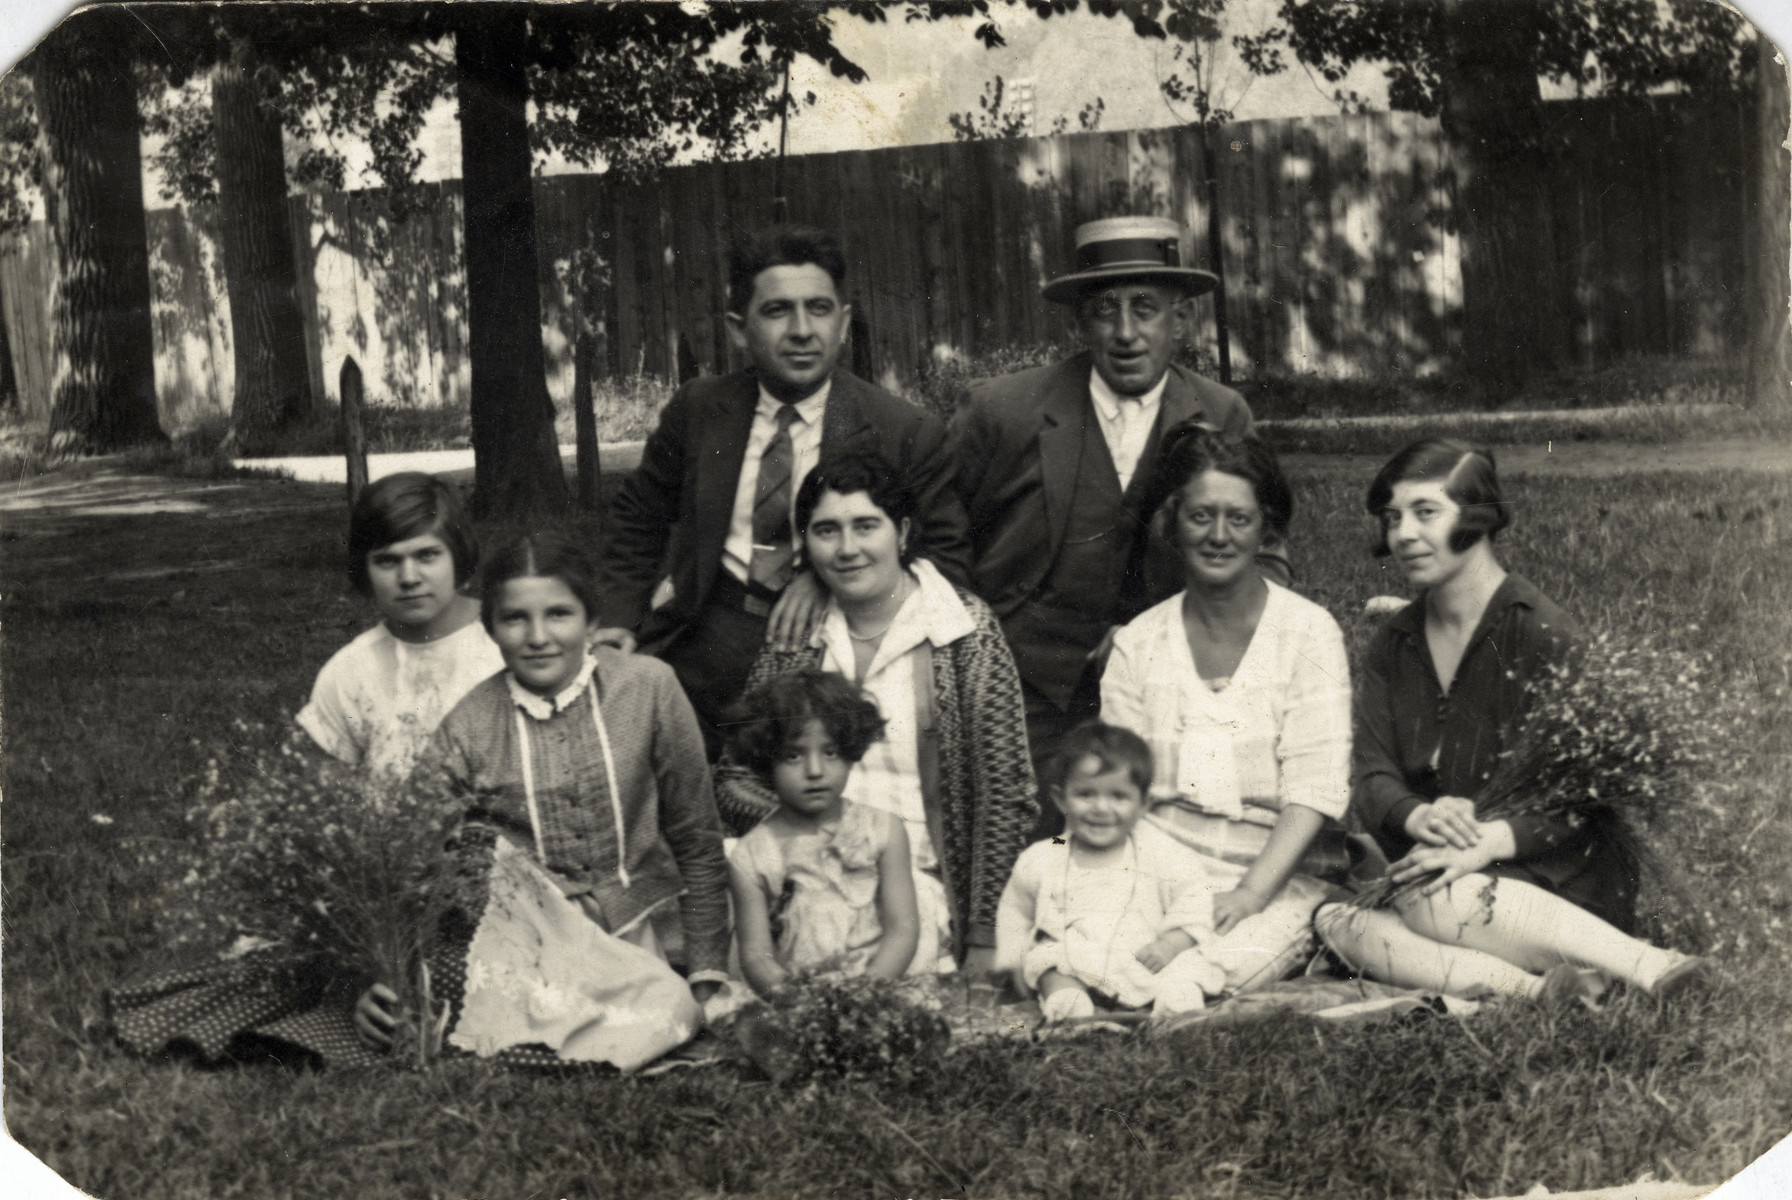 The Manojlvic family poses outside with their children and governesses.

Pictured are Izak Manjlovic, and his sisters Milla (far right), and Rasha (3rd from the right), with their children and governesses. Rasha and her children perished during the Holocaust.